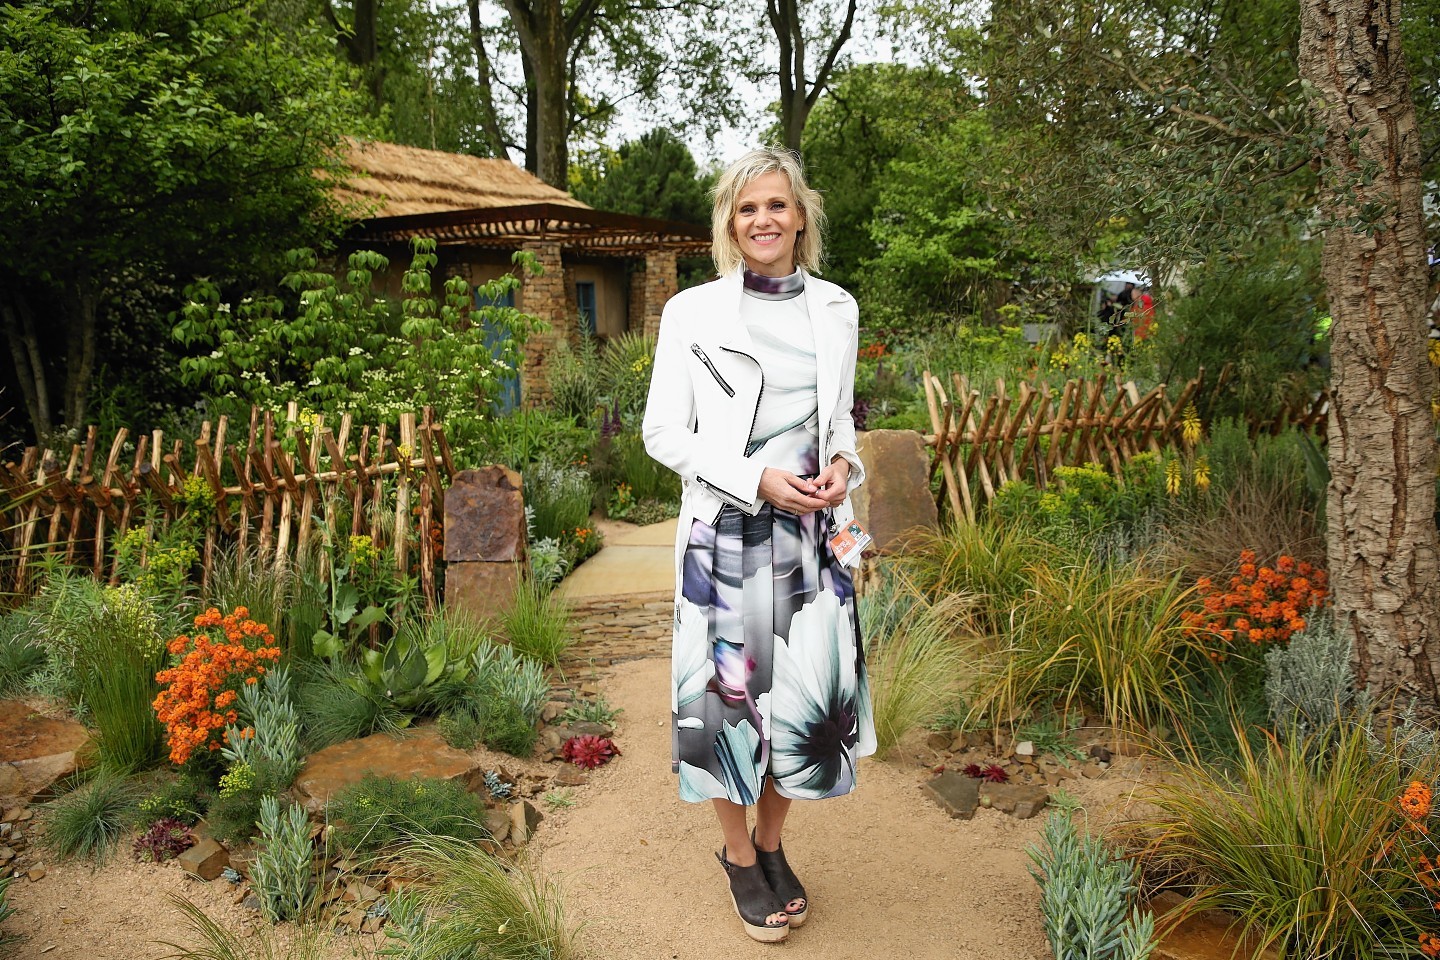 Linda Barker visits the Sentebale 'Hope In Vunerability' Garden during the annual Chelsea Flower show at Royal Hospital Chelsea on May 18, 2015 in London